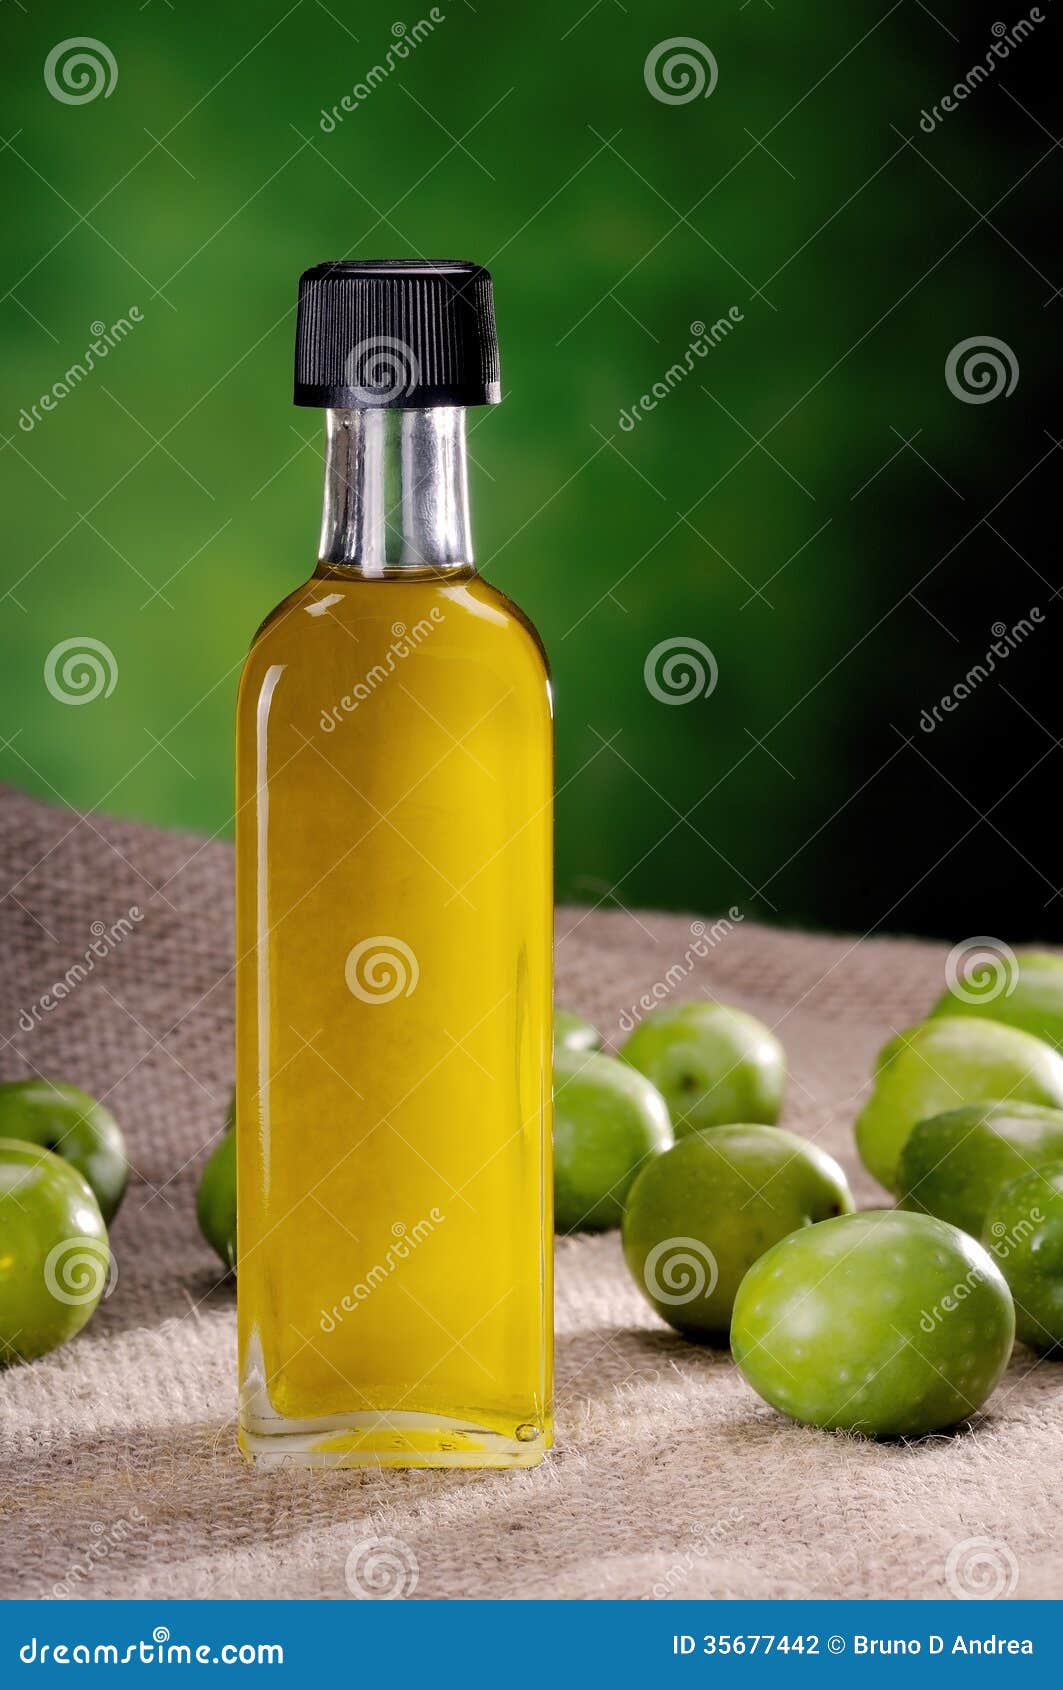 Download 192 Yellow Liquid Olive Oil Small Glass Bottle Photos Free Royalty Free Stock Photos From Dreamstime Yellowimages Mockups